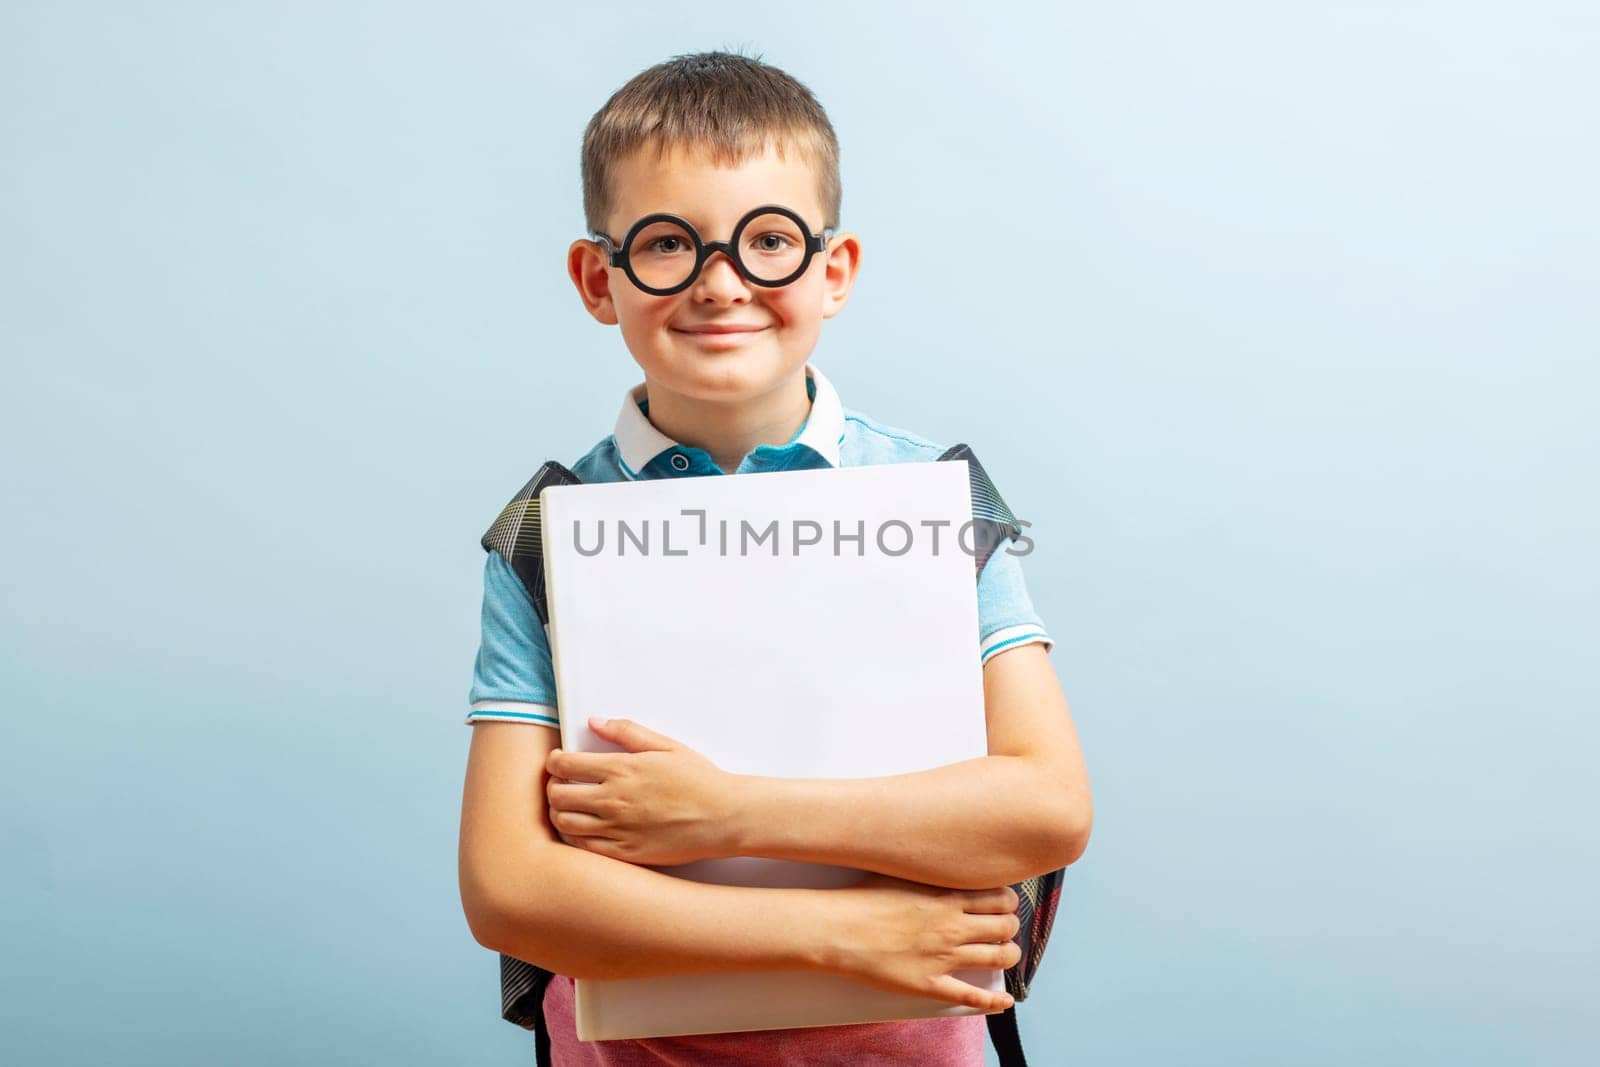 Back to school. Happy elementary school student in eyeglasses hugging a book smiling at camera on blue background. Free space.